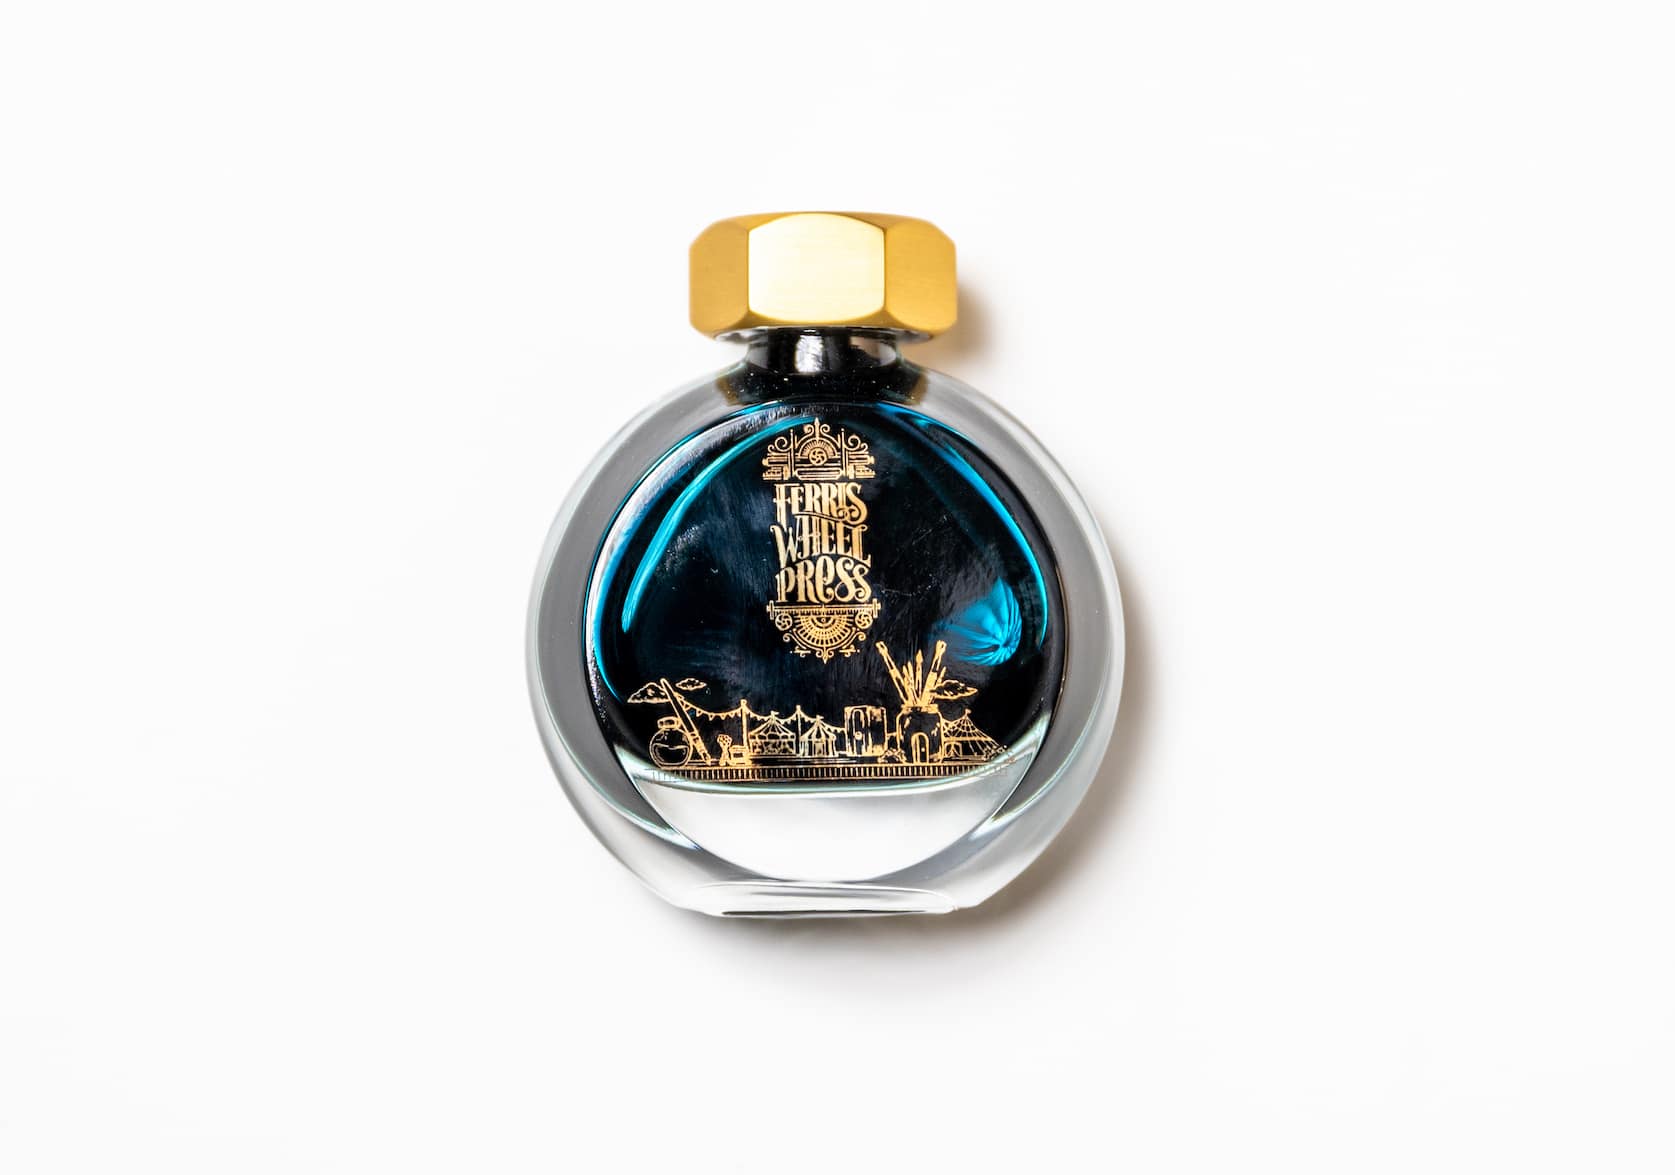 A round glass bottle of ink with a gold lid. On the bottle there is a small gold illustration featuring a merry-go-round and circus tent.